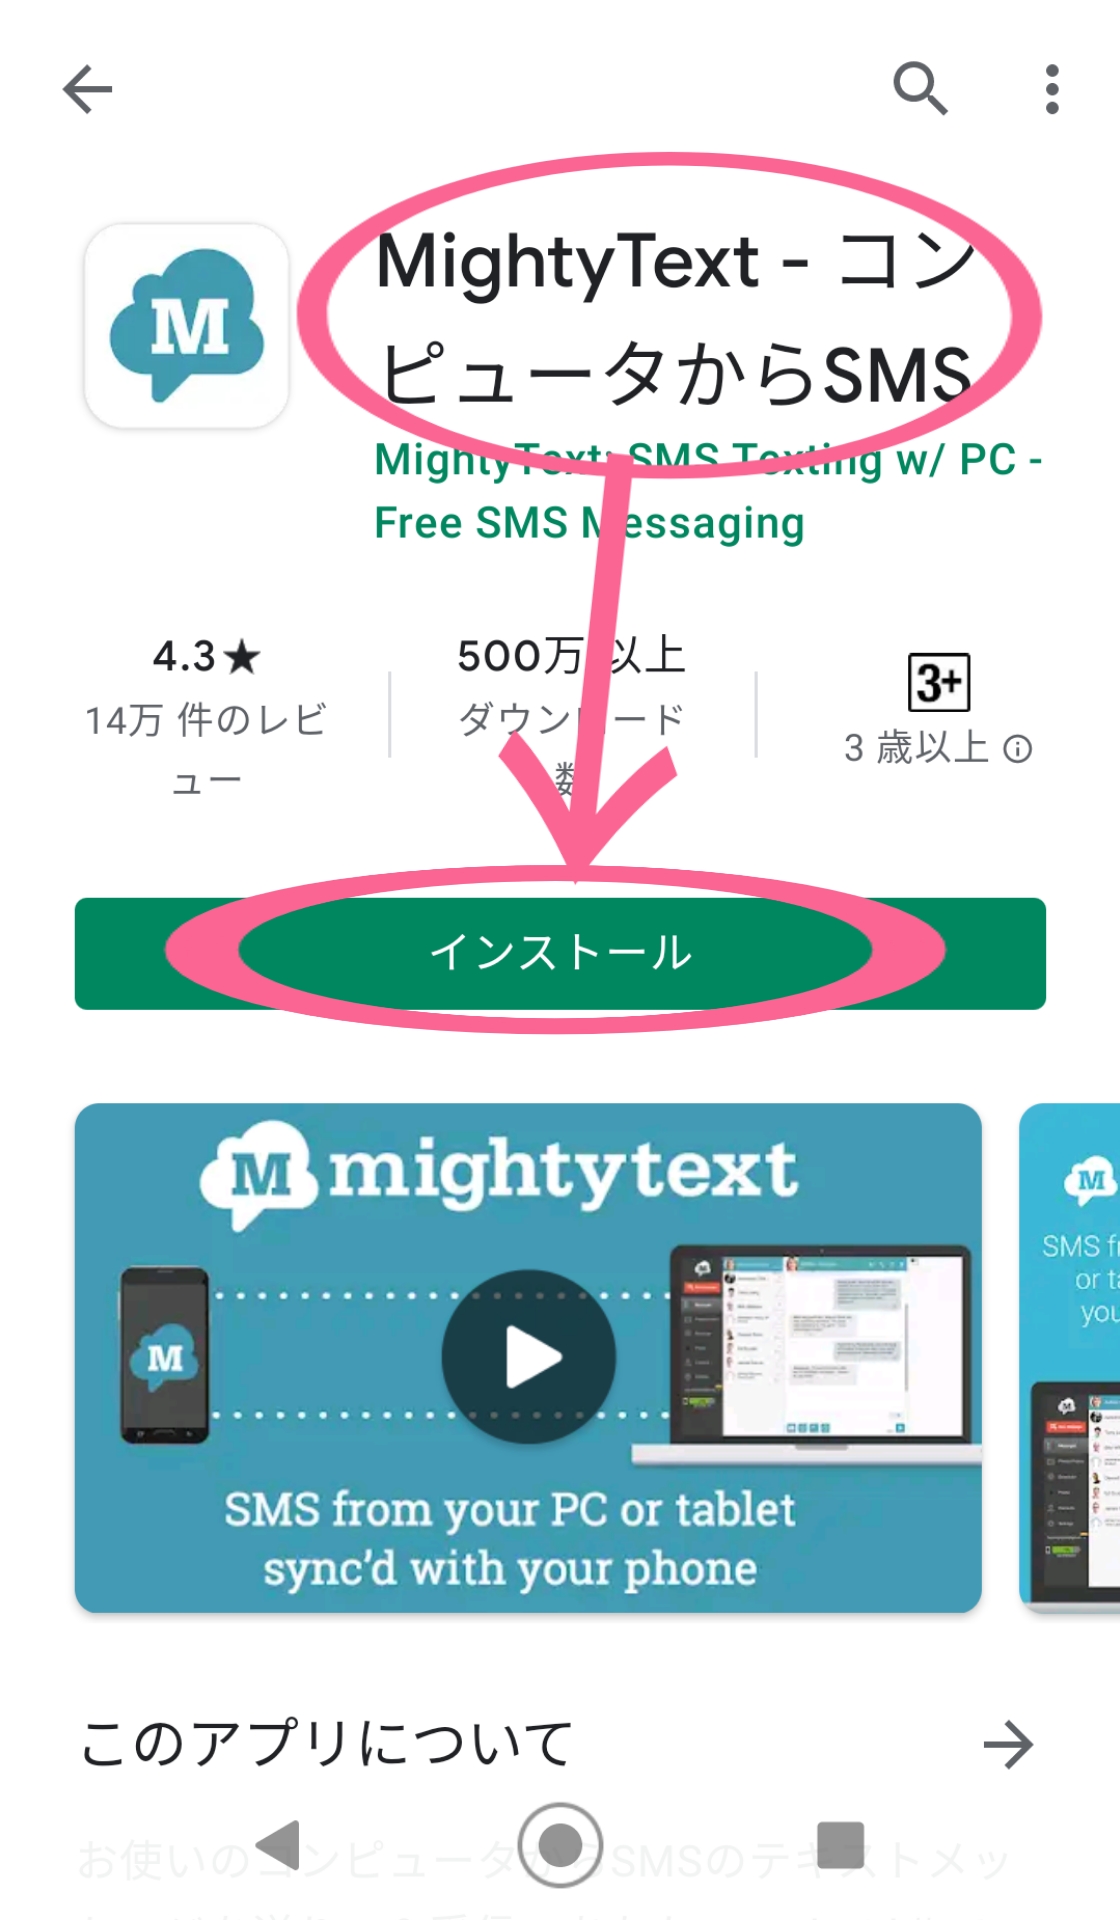 Android　スマホ　MightyText - コンピュータからSMS　確認　インストール　タップ